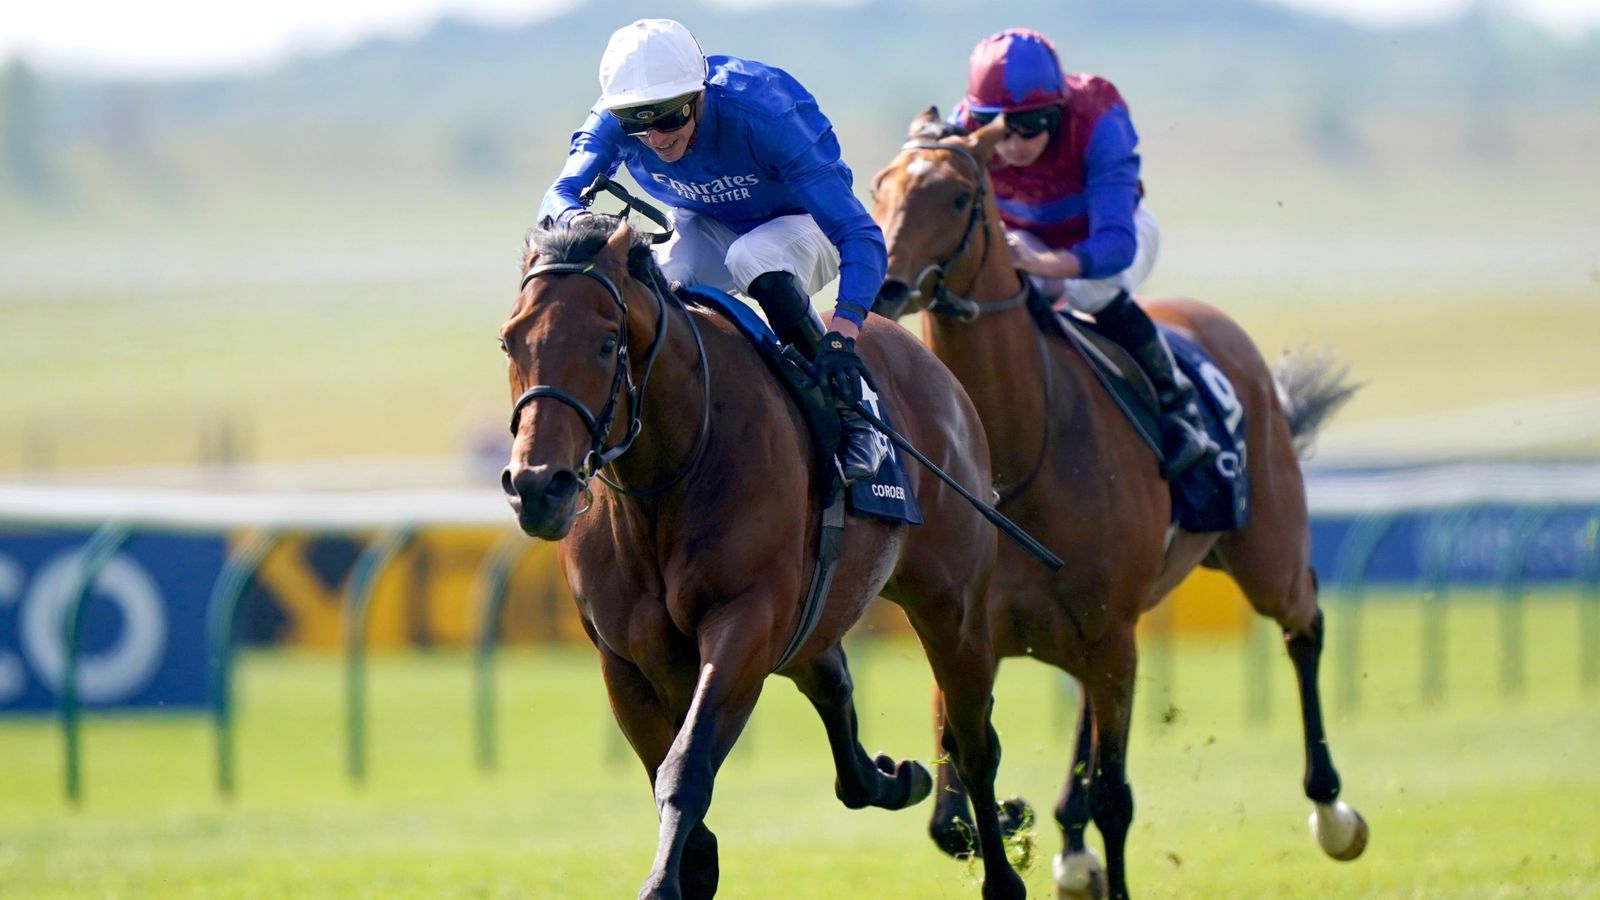 Coroebus poised for starring role in St James’s Palace at Royal Ascot